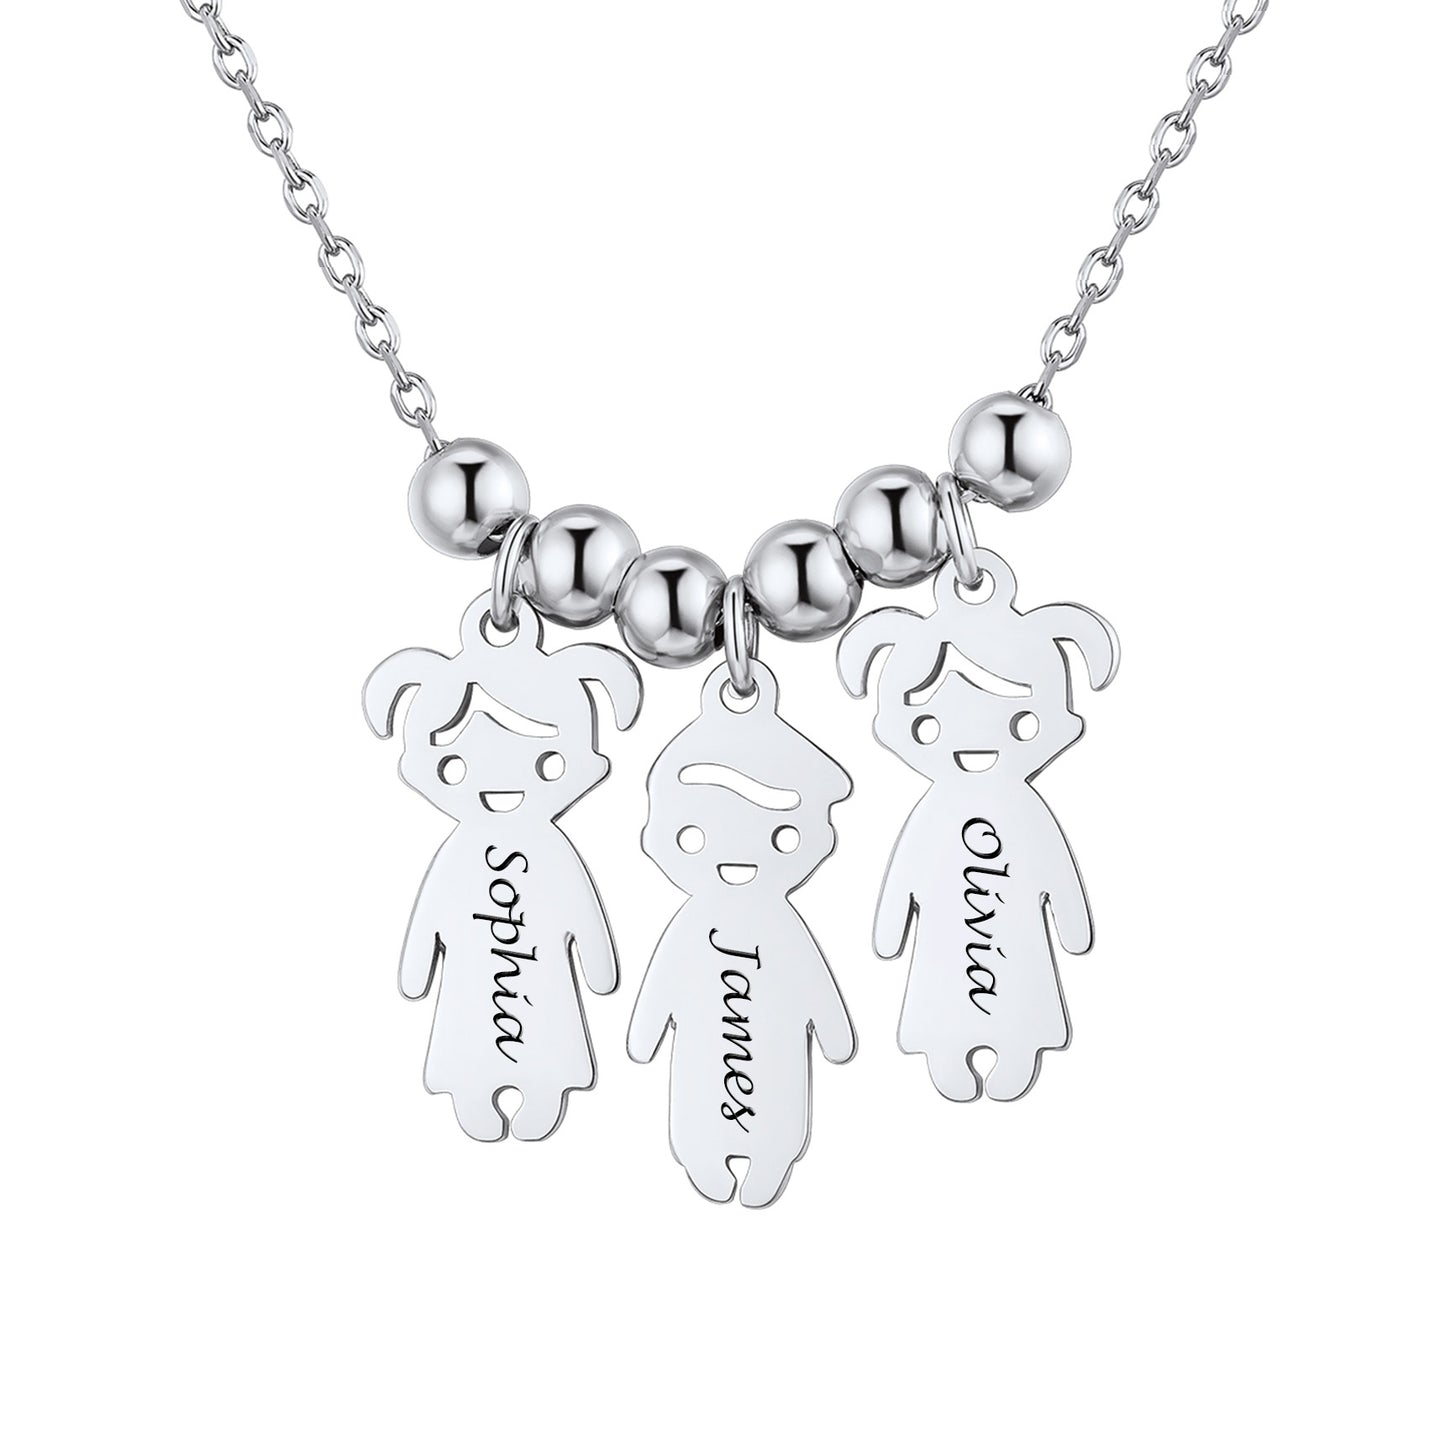 3 children necklace for mom